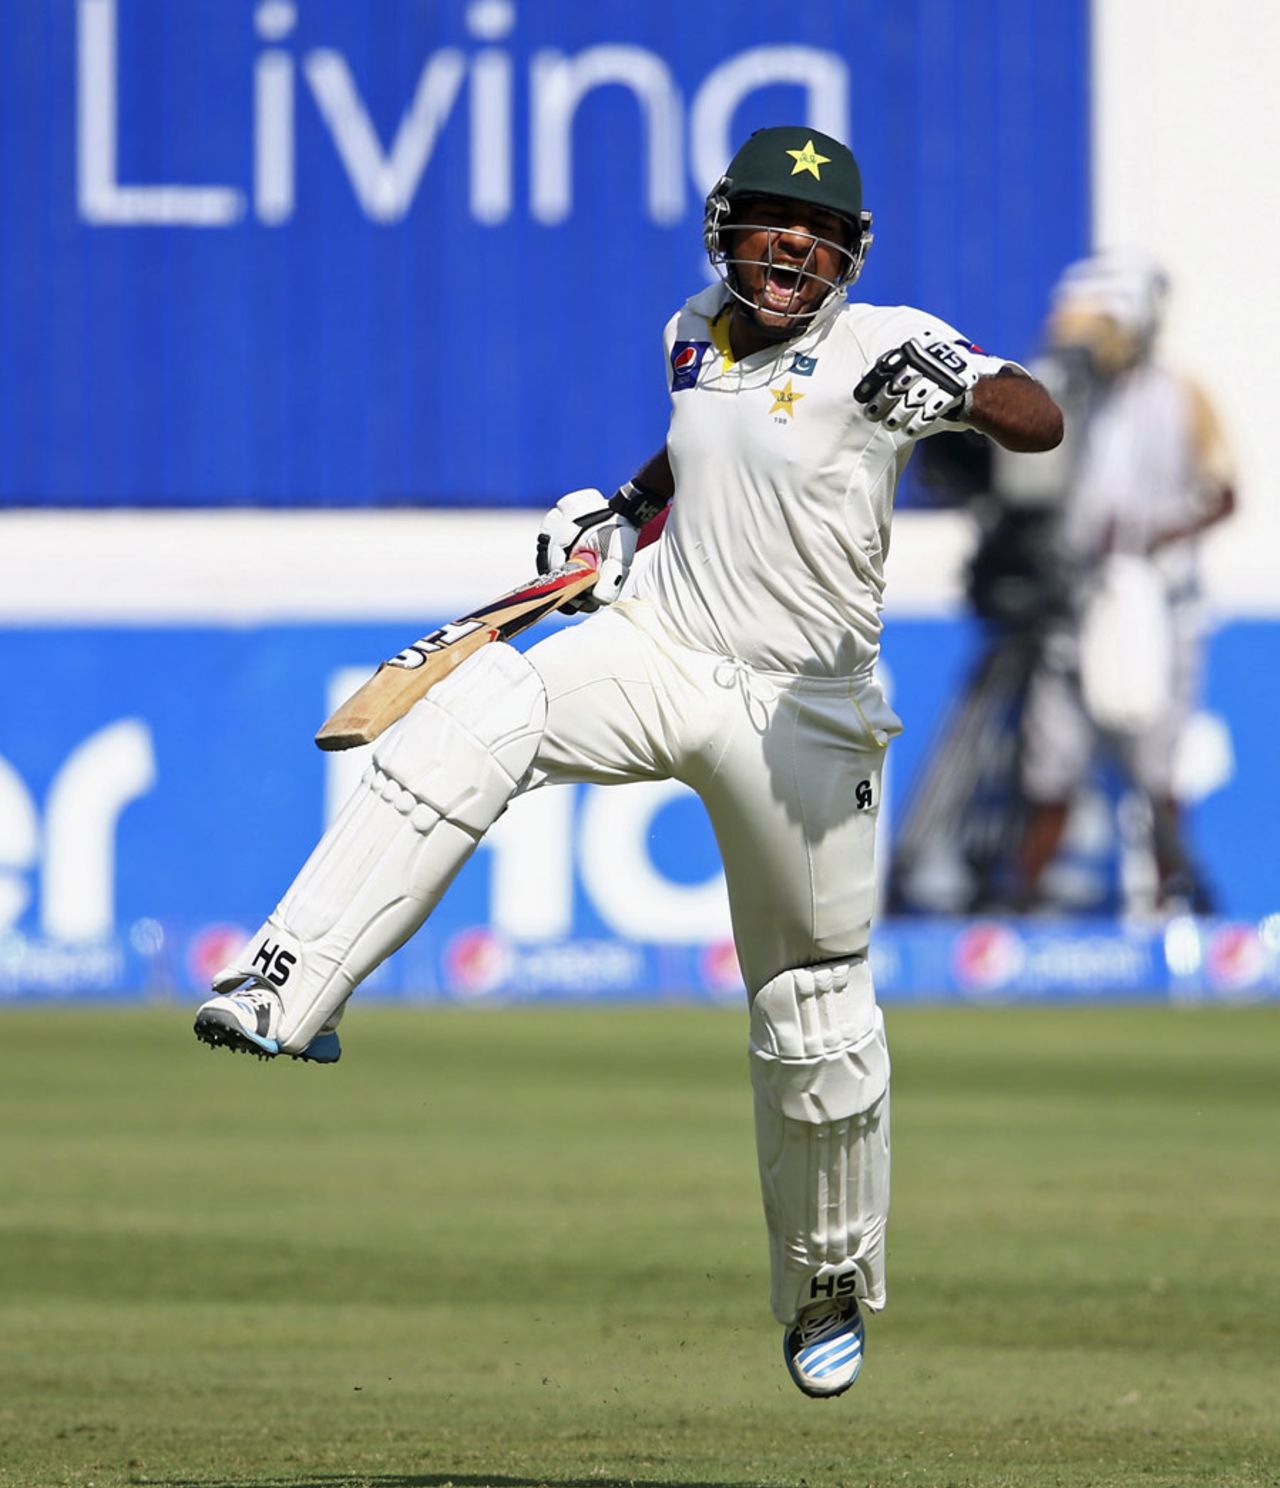 Sarfraz Ahmed exults after scoring his third Test century of the year, Pakistan v New Zealand, 2nd Test, Dubai, 4th day, November 20, 2014